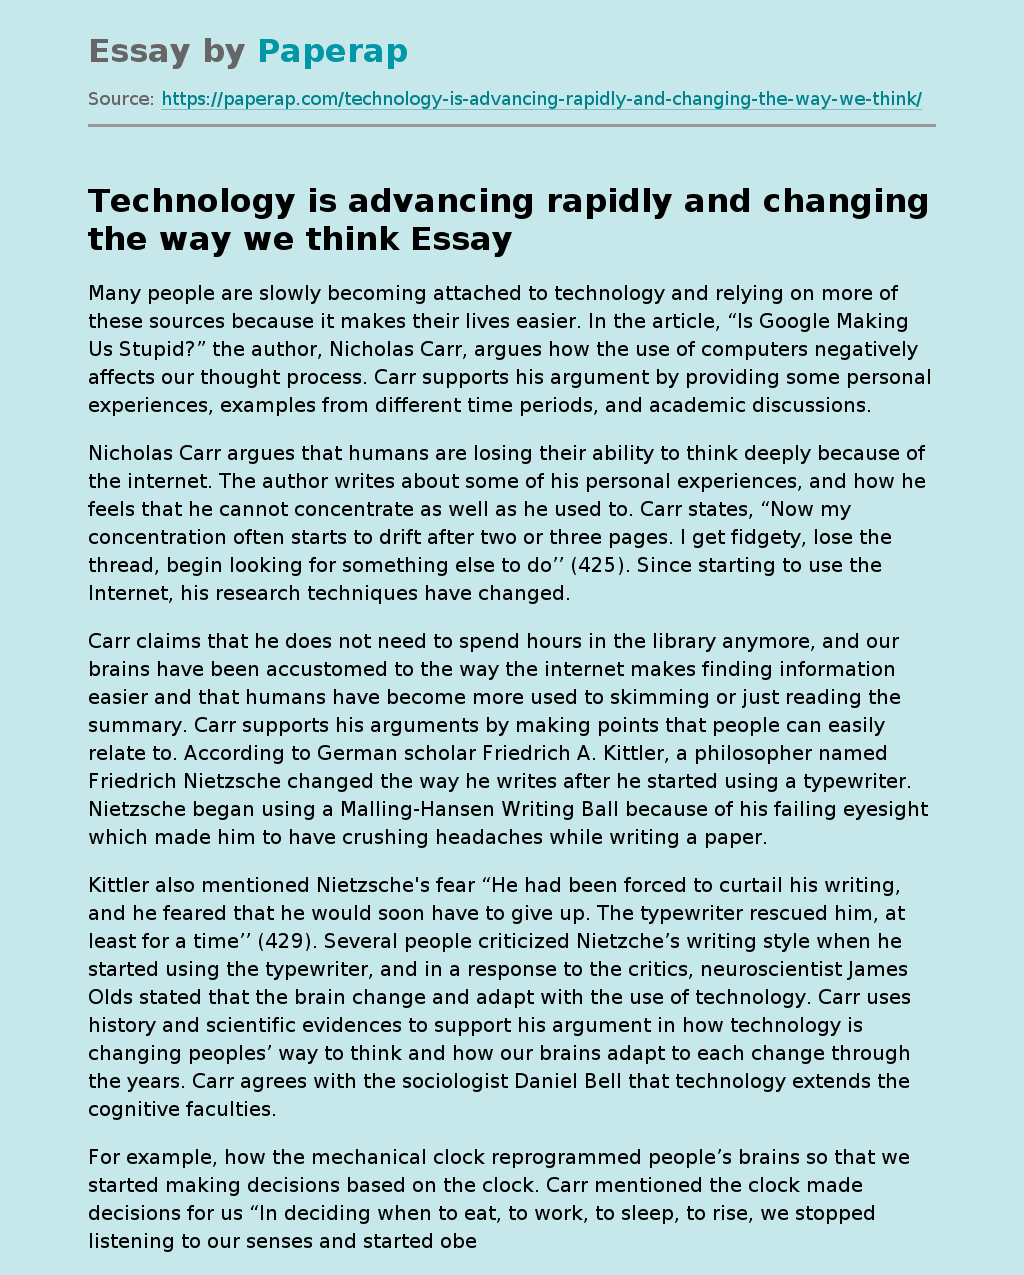 today technology has changed the way we live essay